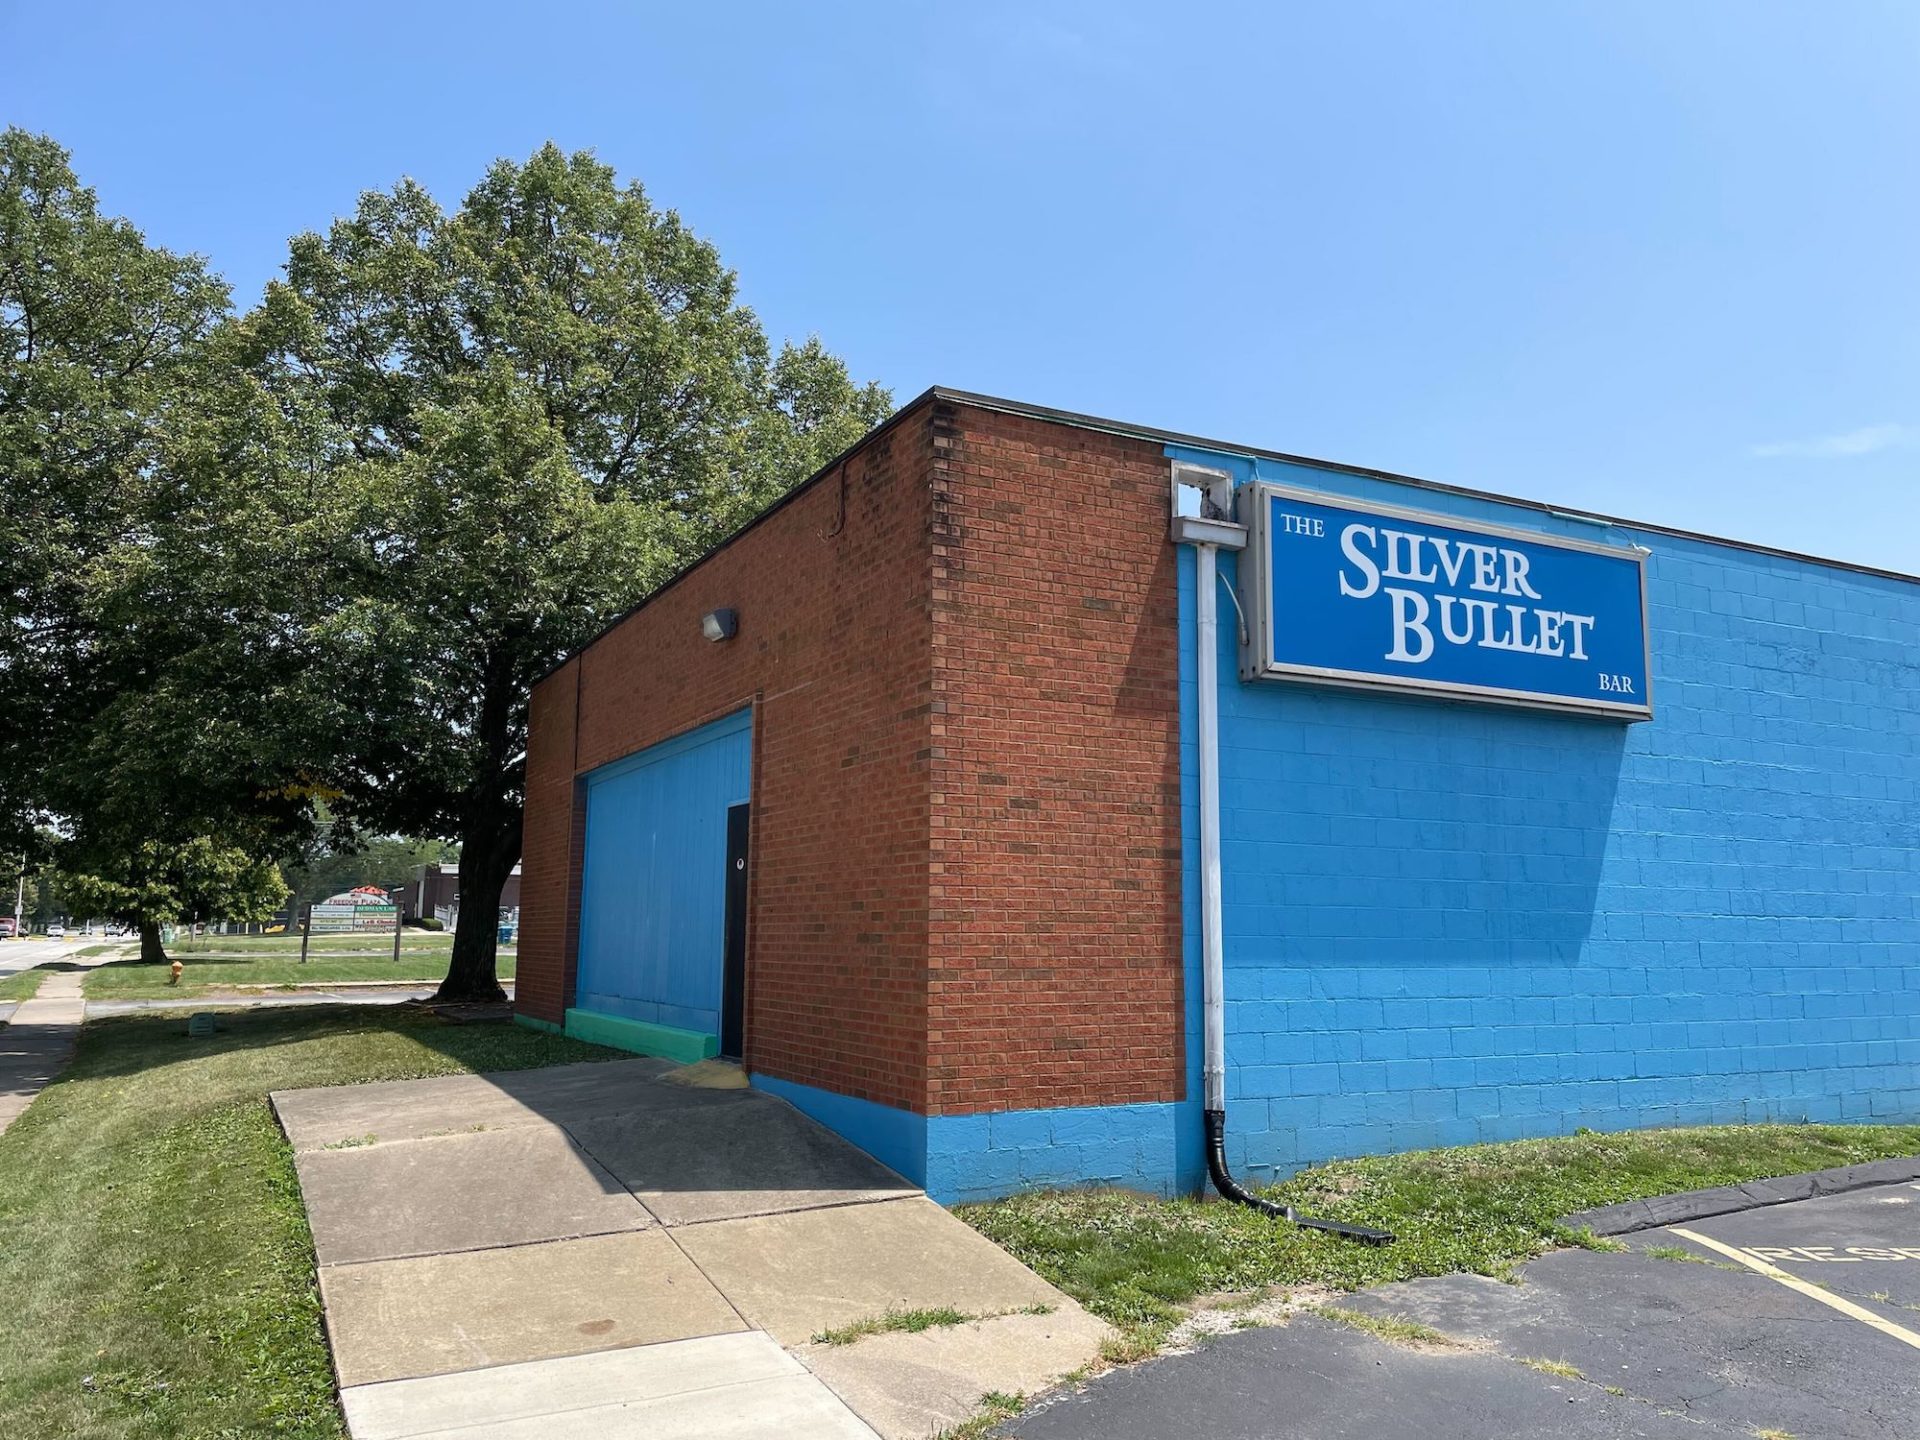 Photo of Silver Bullet in Urbana. Building has a brick front with a bright blue side wall and front panel. There is a blue sky and trees in the background.